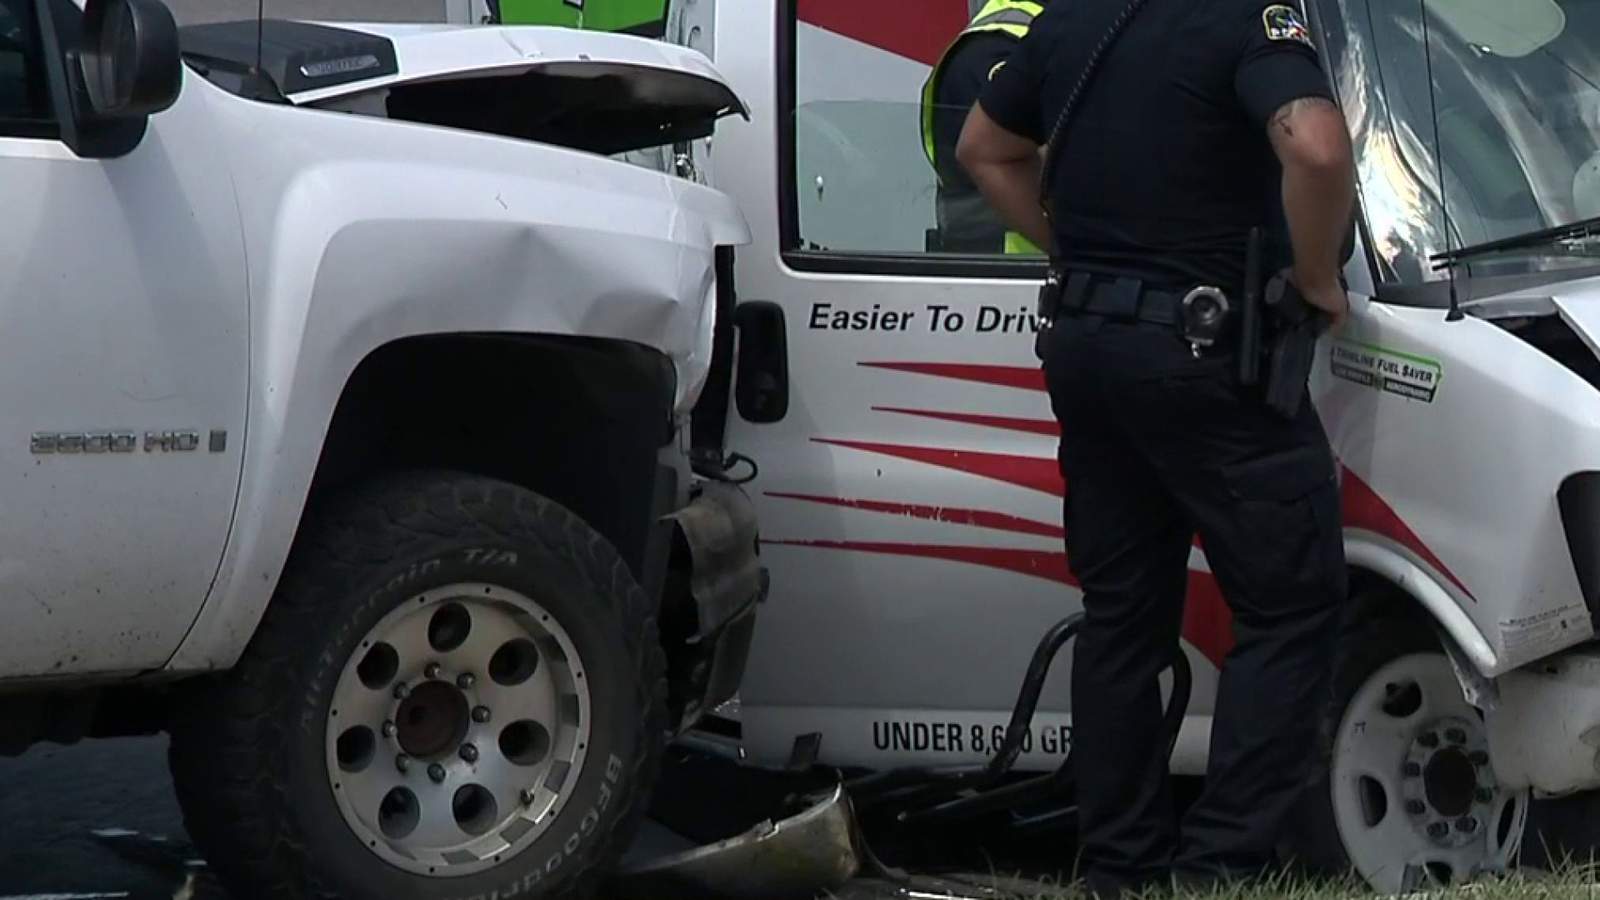 Two arrested after police chase with stolen U-Haul vehicle, Leon Valley officials say